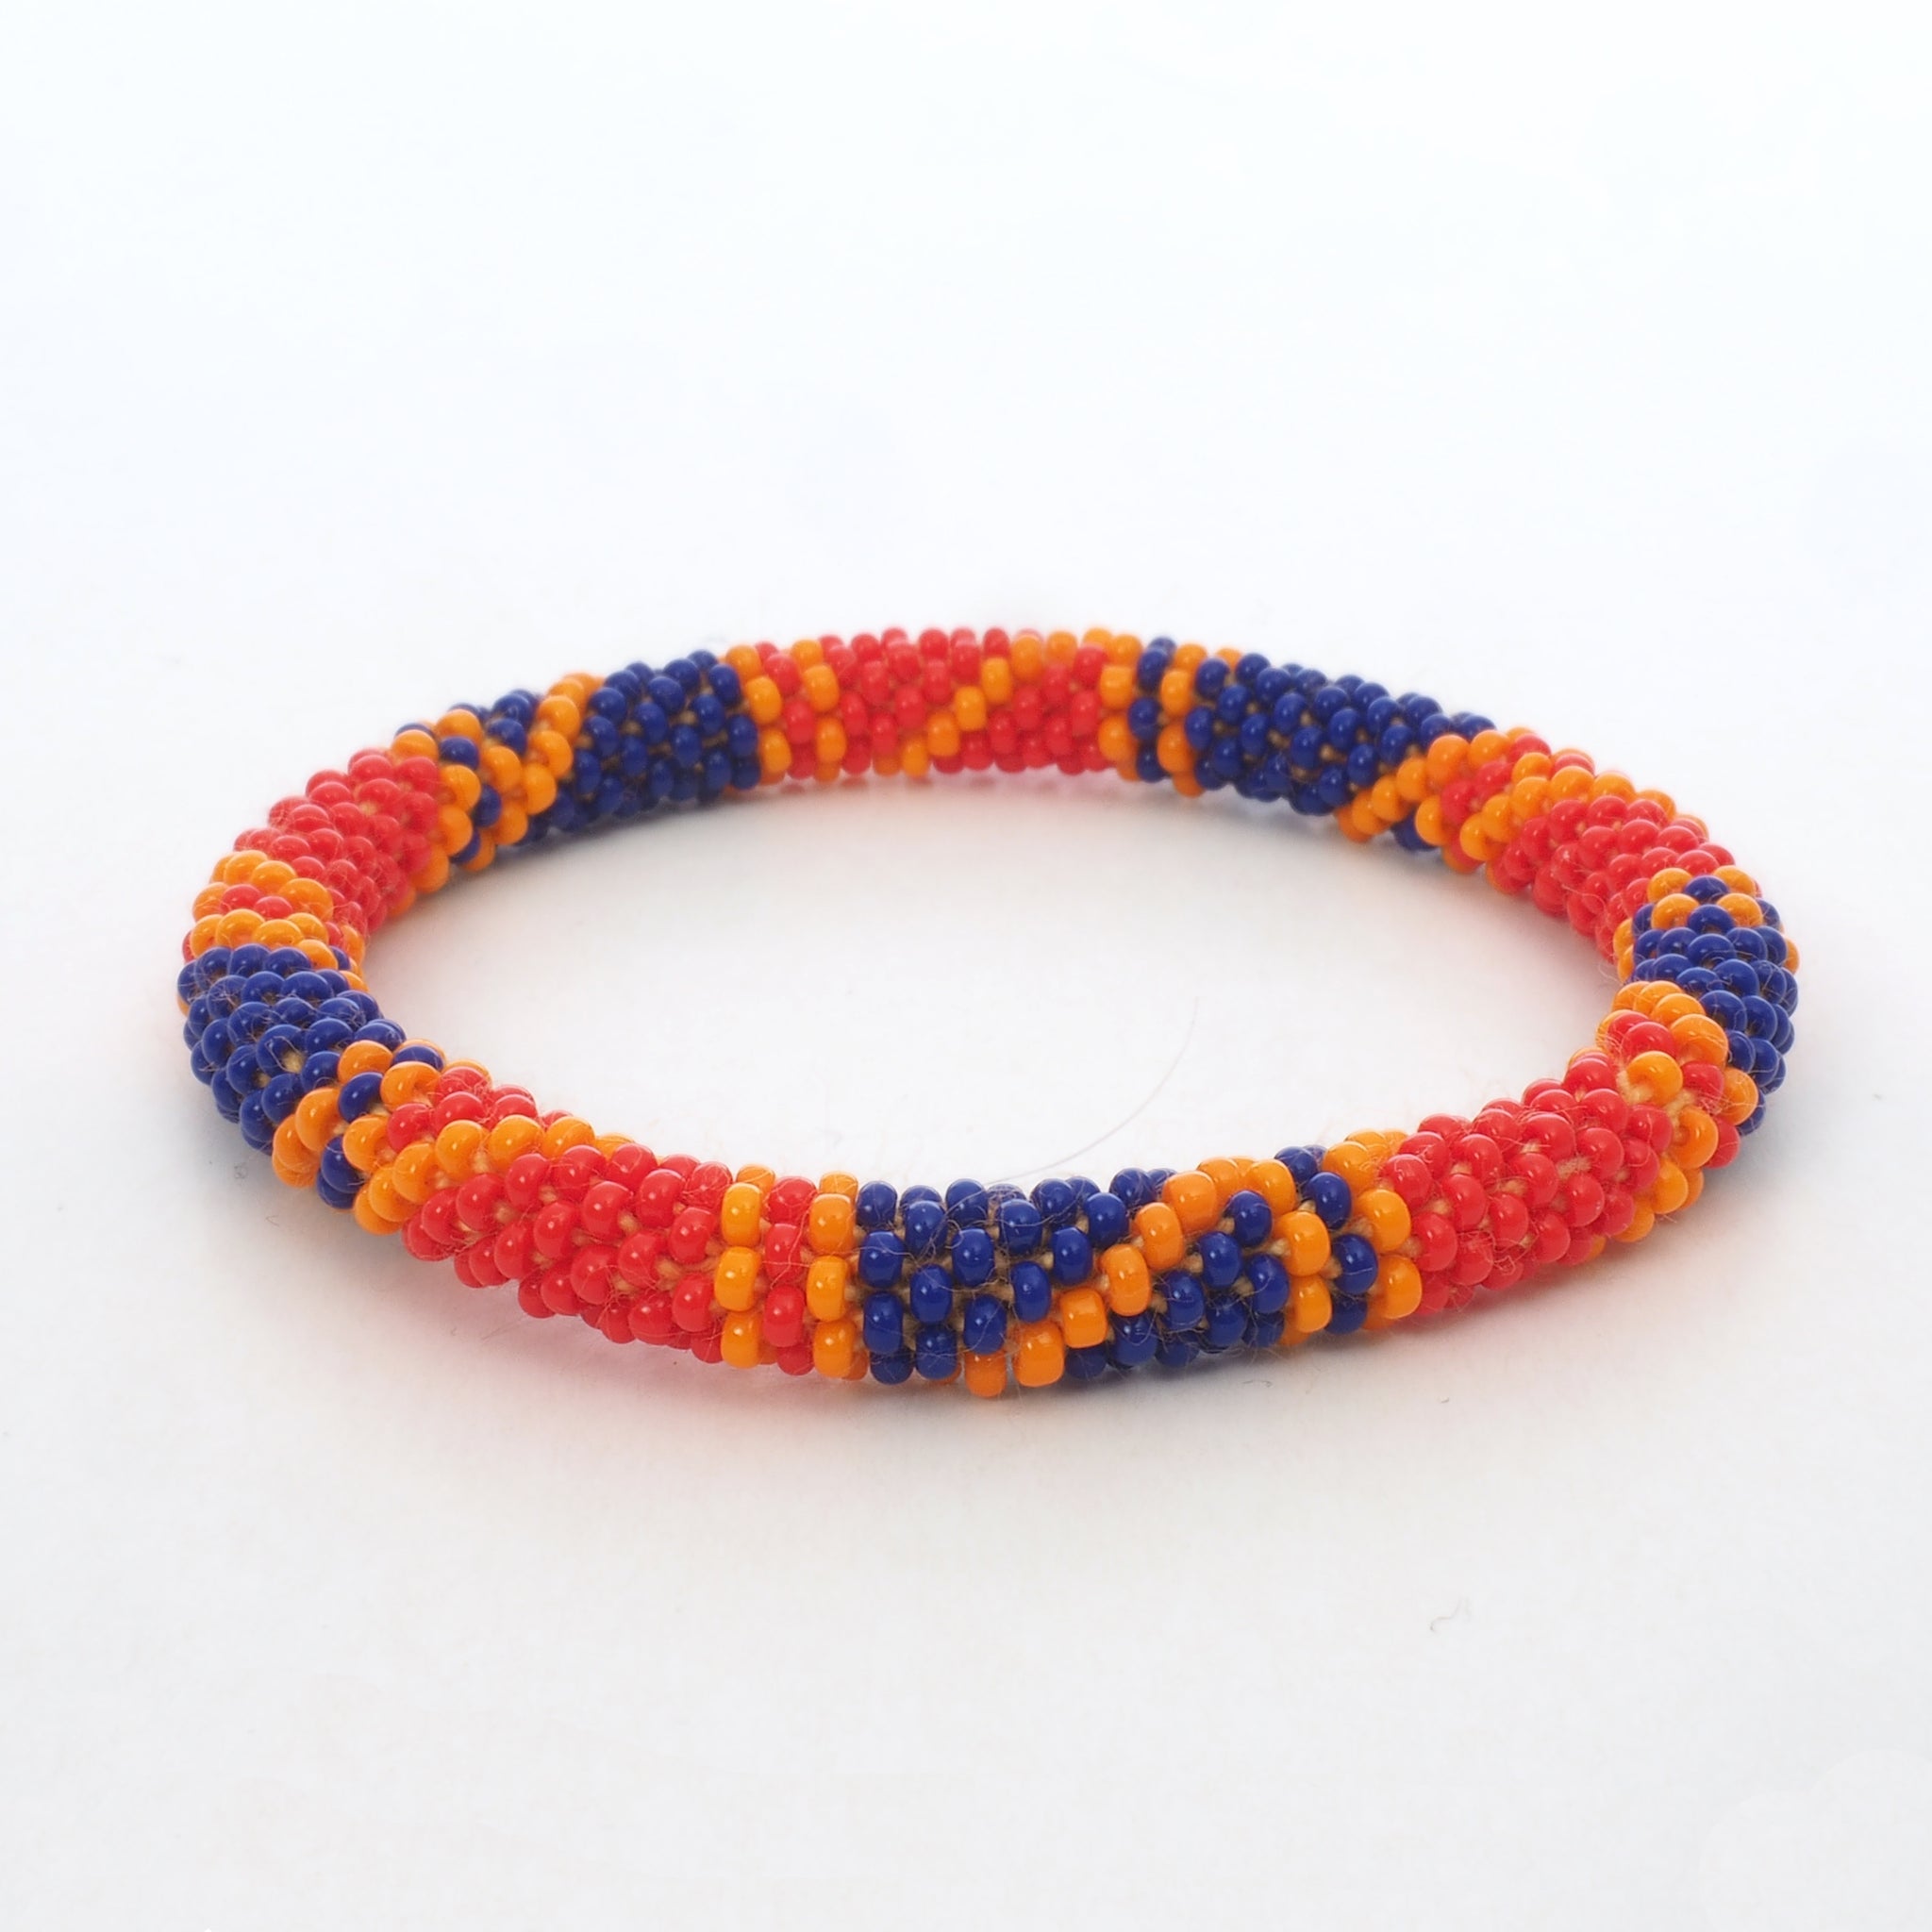 One beaded bracelet is on the picture. The bracelet is made from red, blue and orange glass beads. The bracelet has a geometric pattern. The glass beads are clearly shown. The background of the picture is white.  The Battiayo bracelets are handmade from small glass beads.